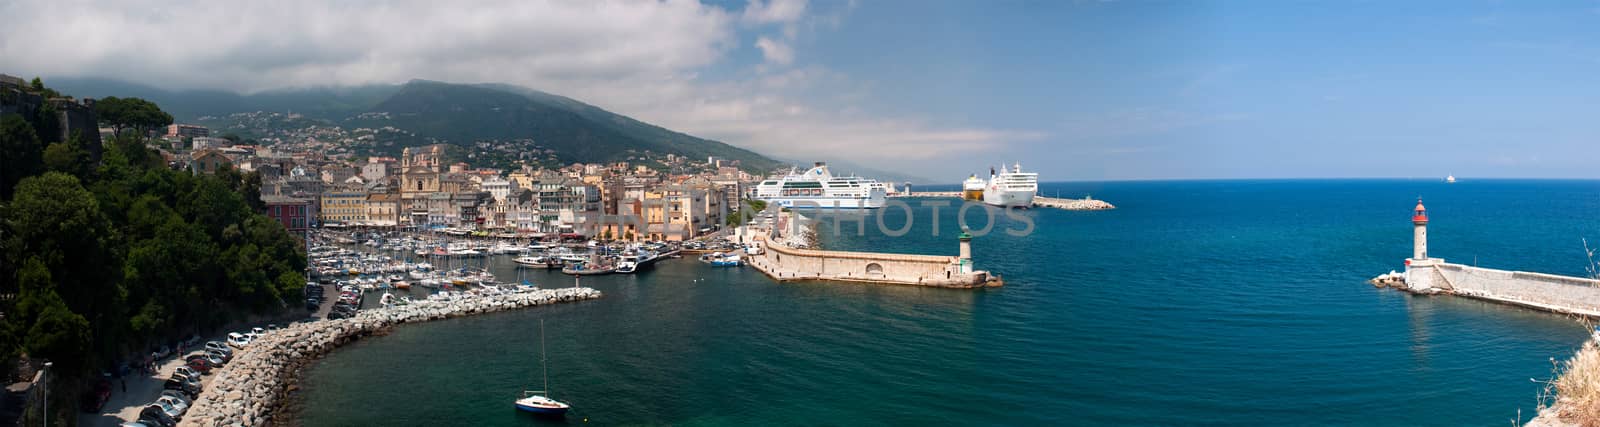 Old and new ports of Bastia. Corsica, France